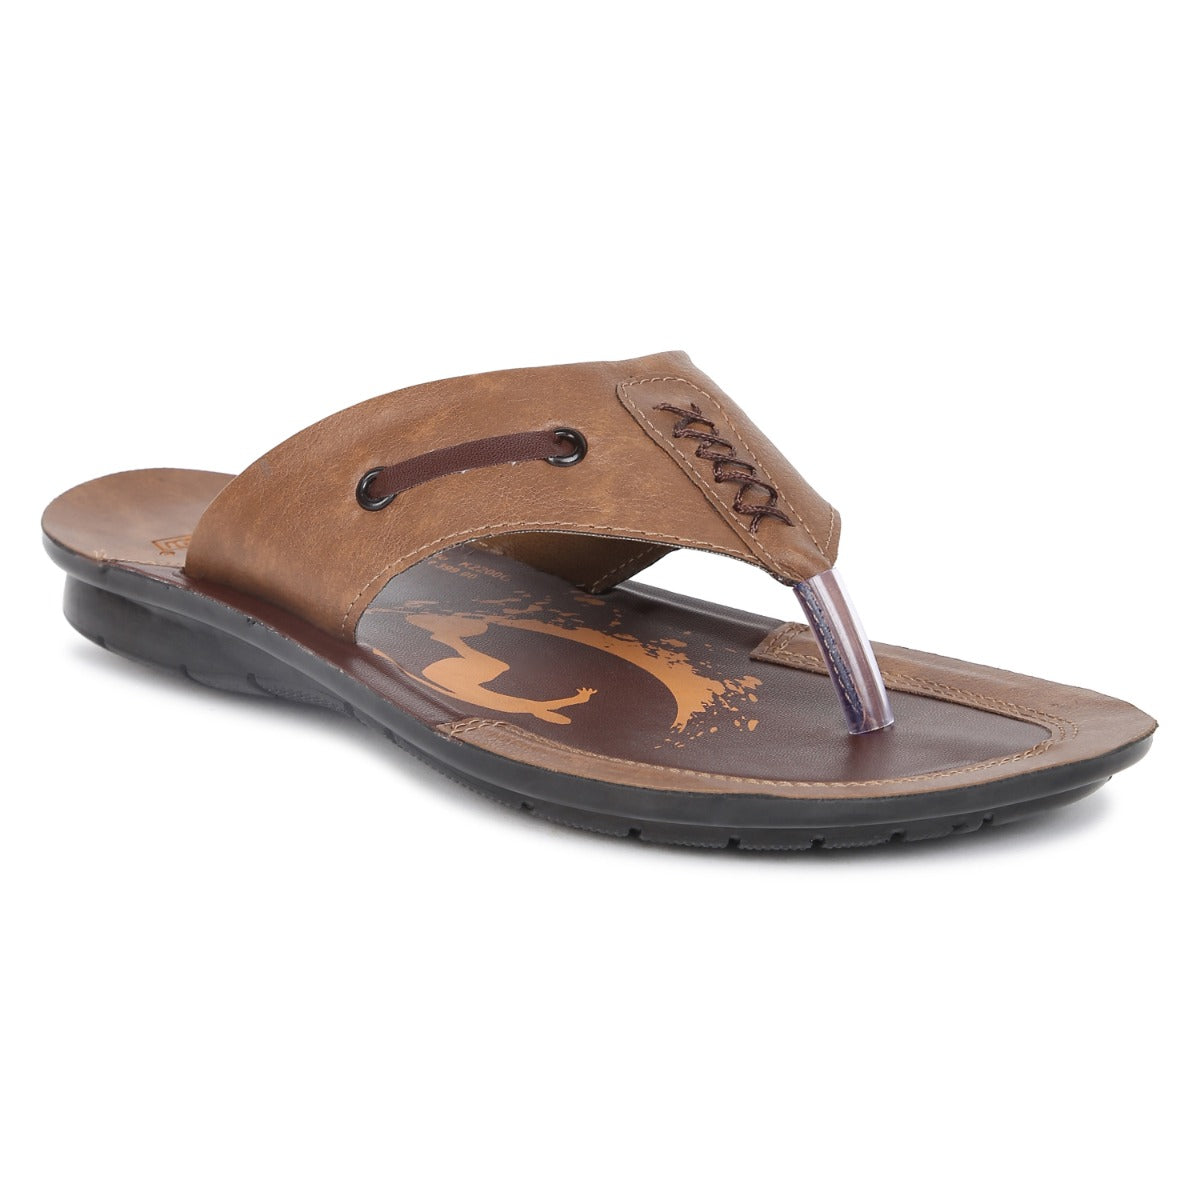 Paragon PUK2200G Men Stylish Sandals | Comfortable Sandals for Daily Outdoor Use | Casual Formal Sandals with Cushioned Soles